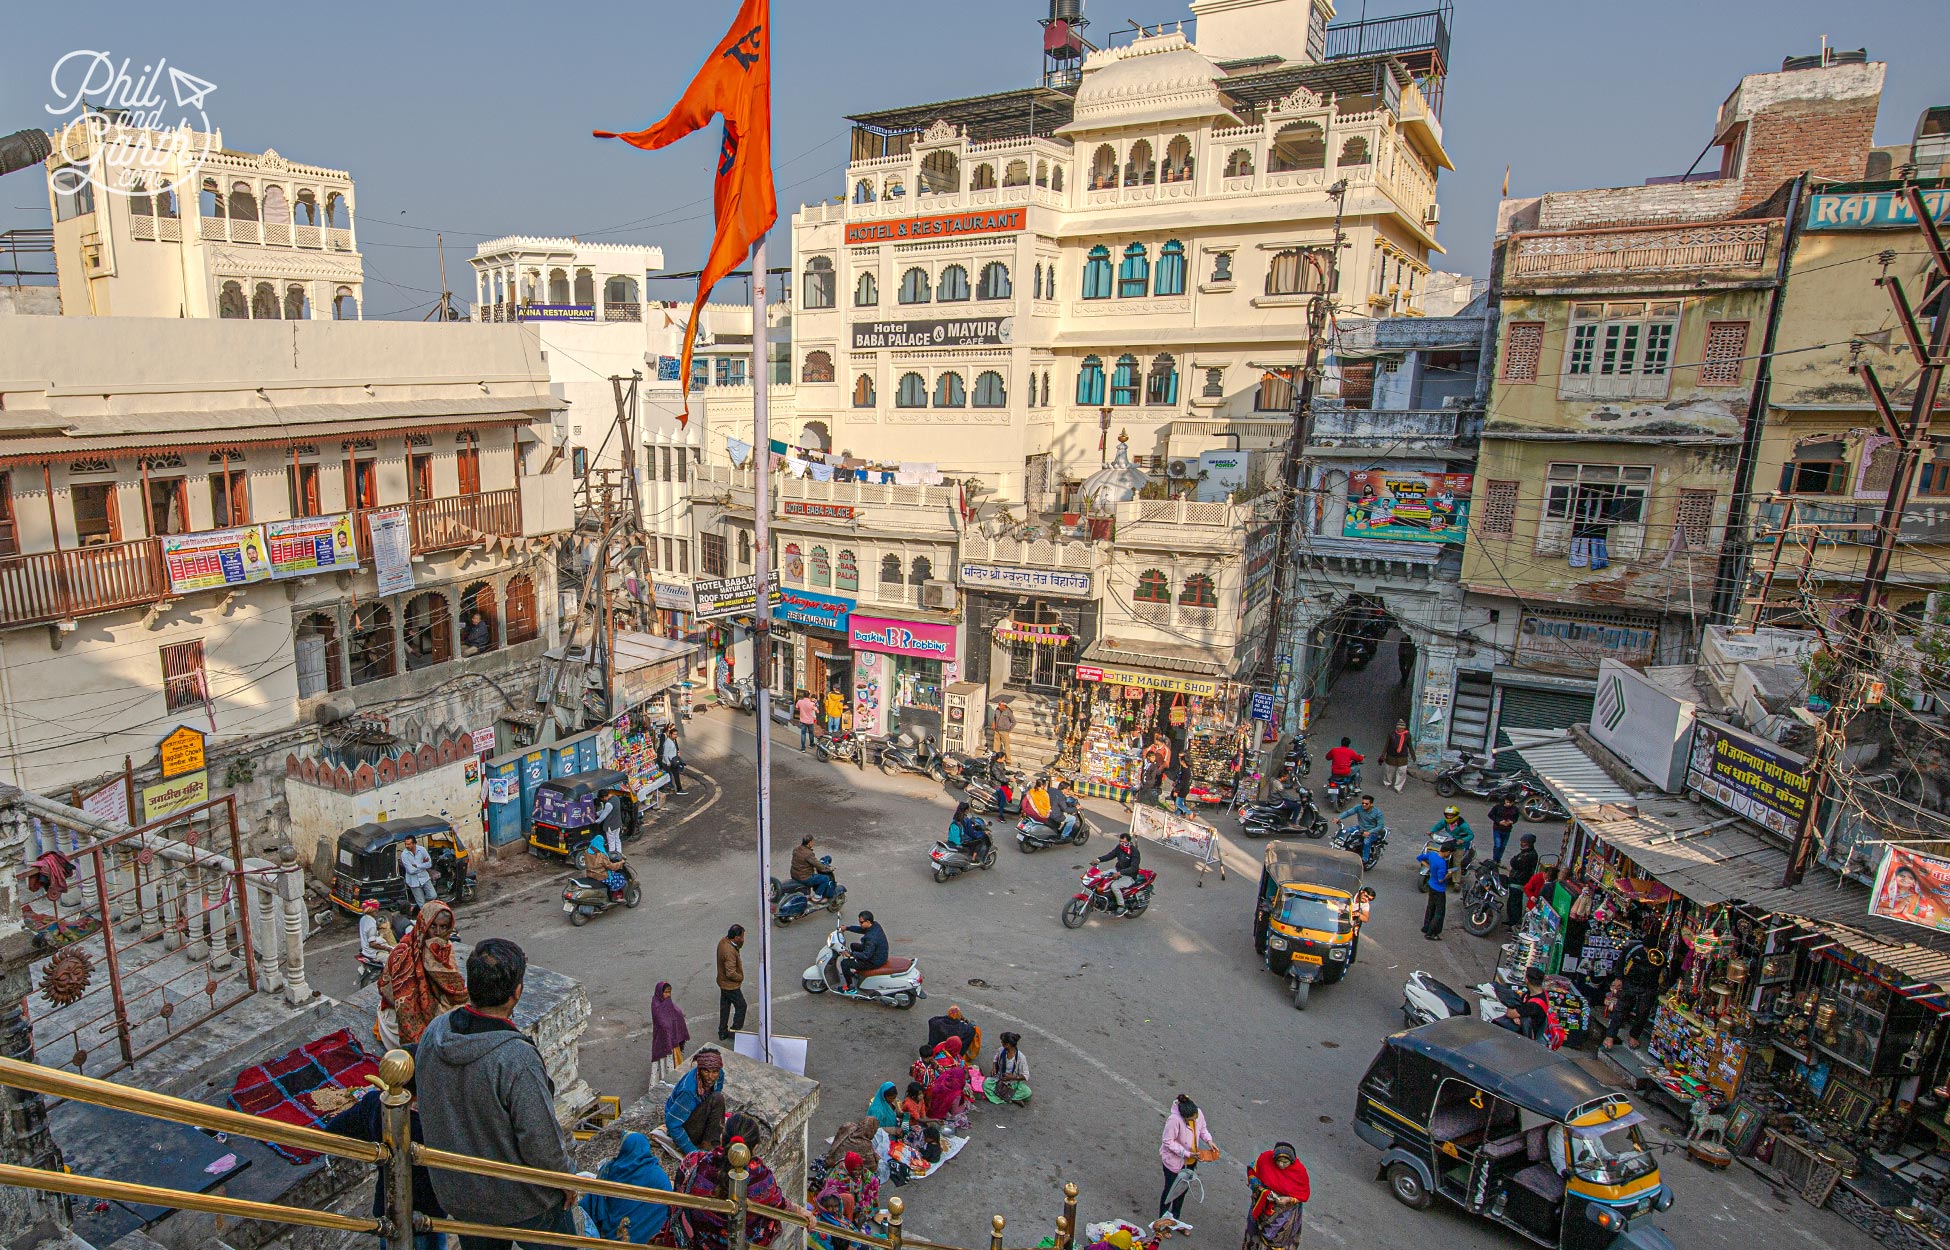 Looking down at the street scenes of Jagdish Chowk